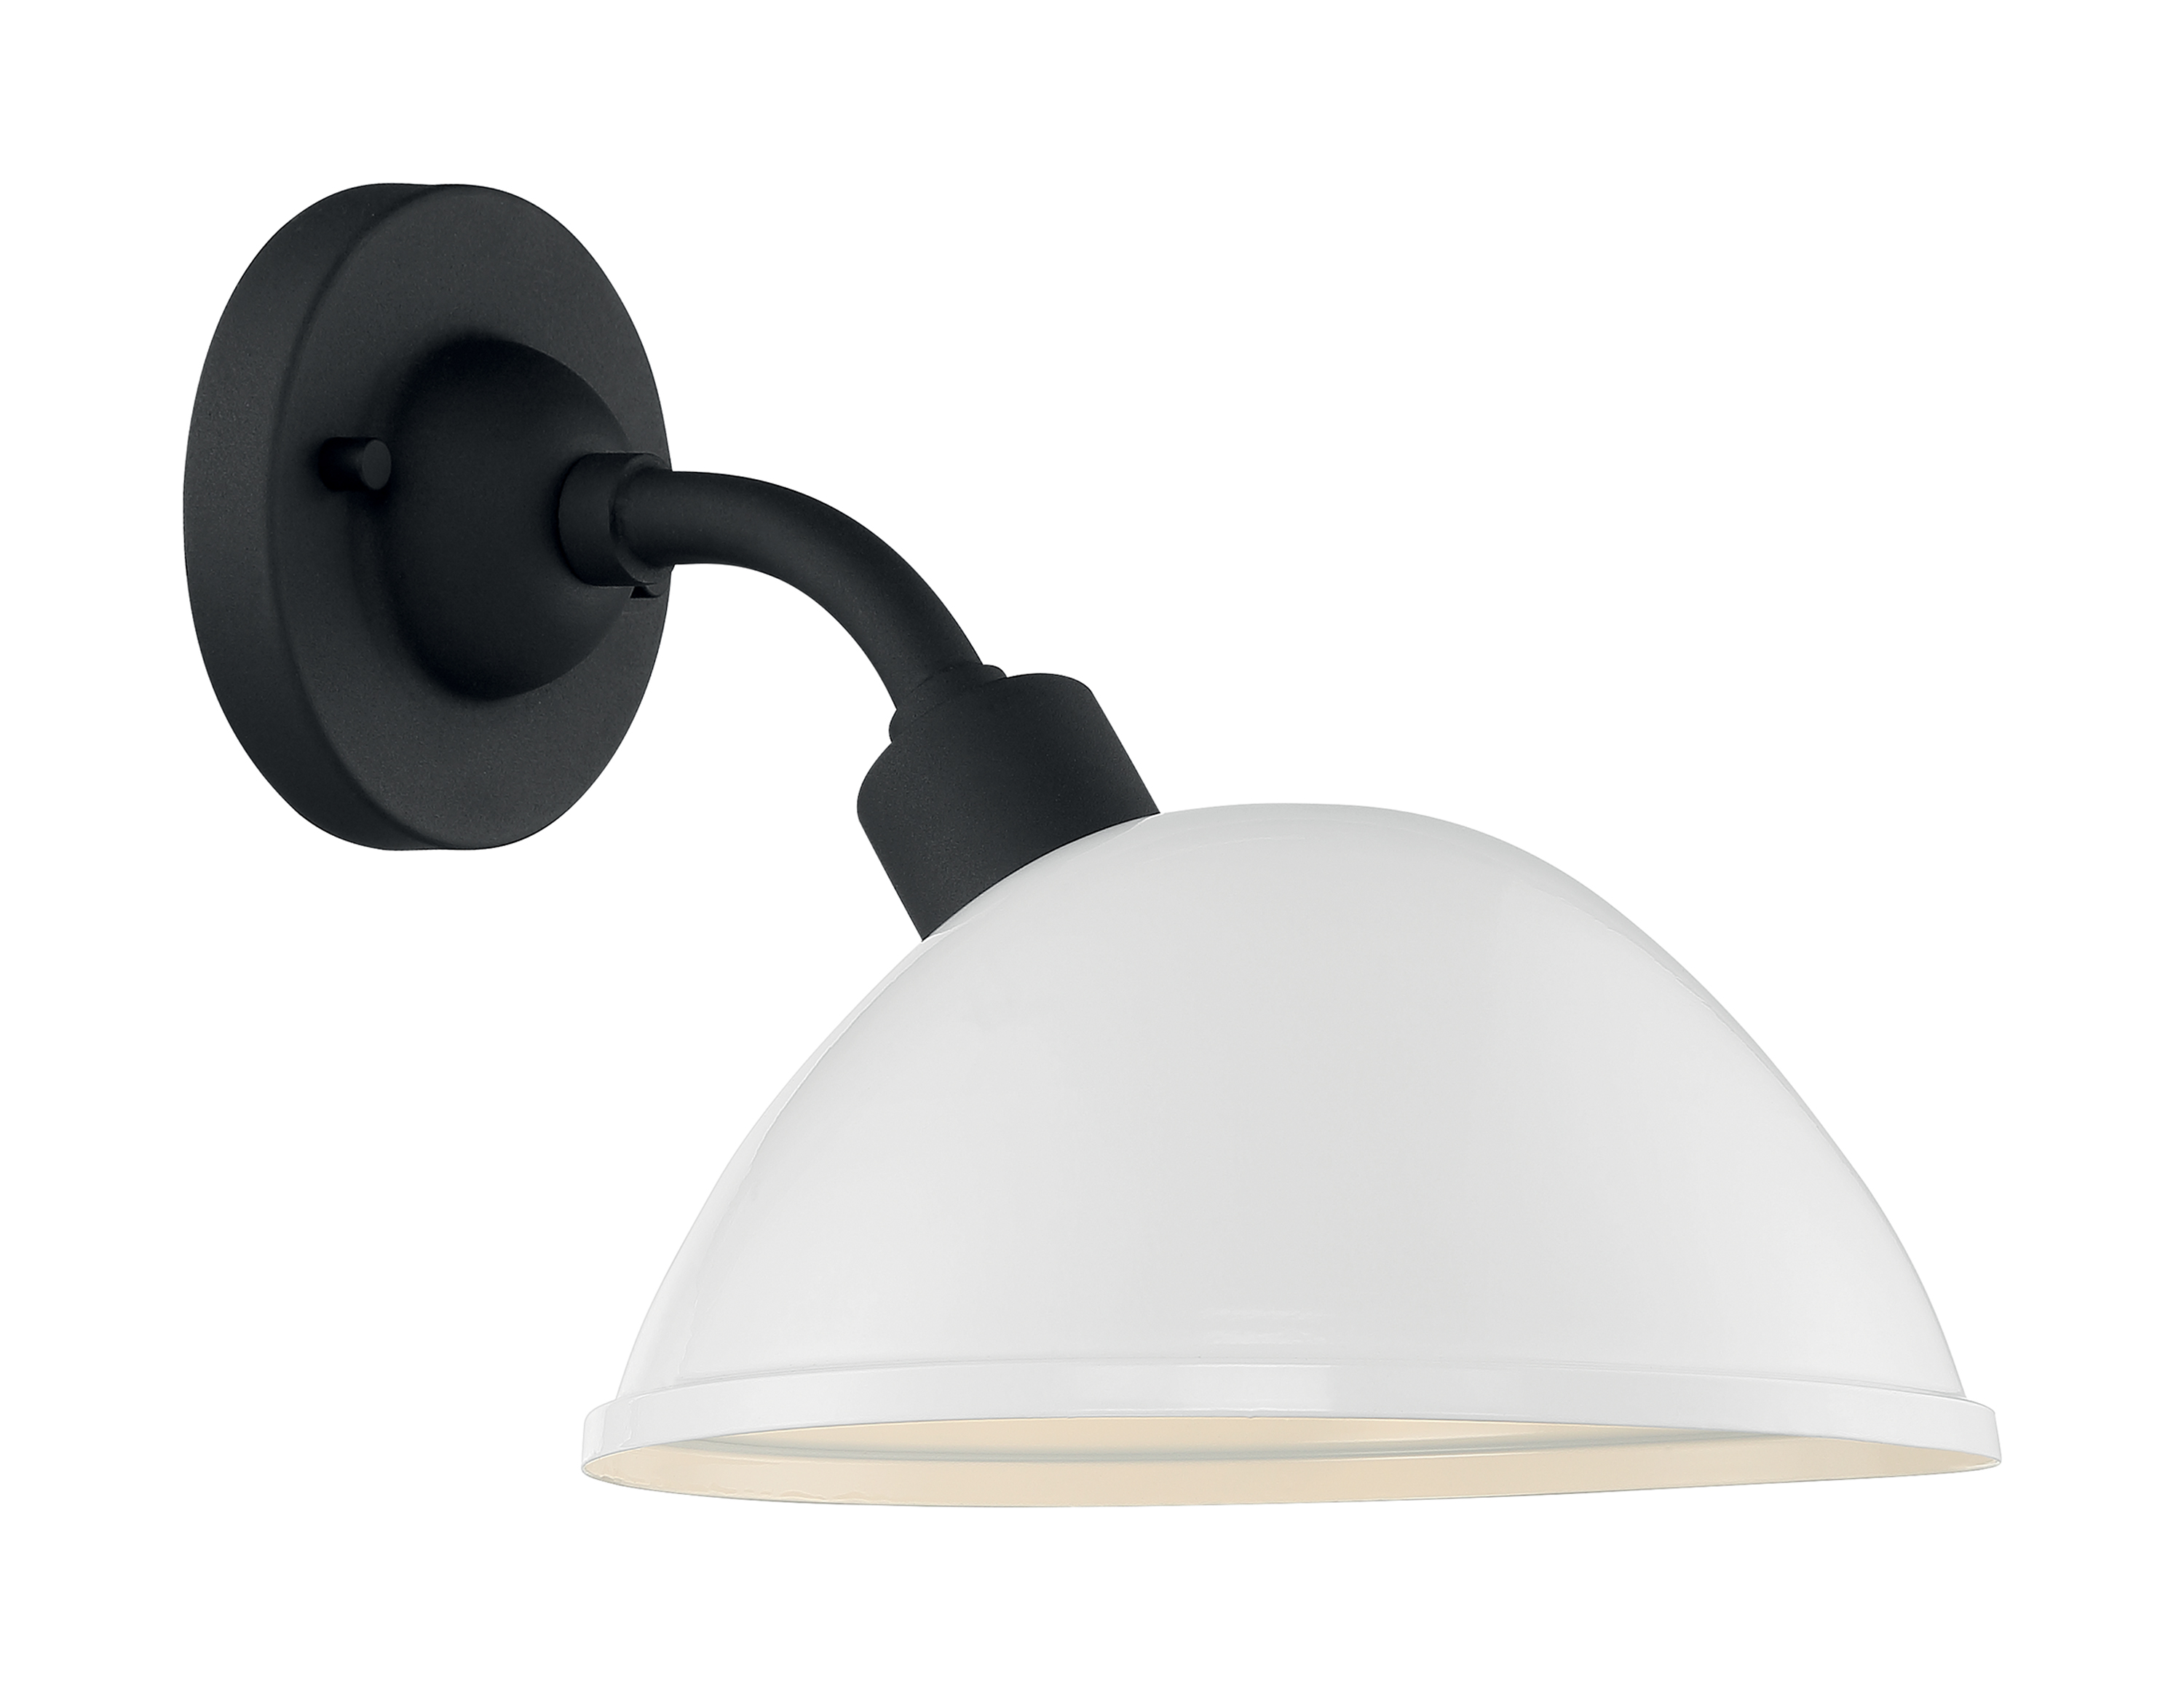 South Street 1-Light Small Outdoor Wall Sconce Fixture - Gloss White Finish with Textured Black Accents